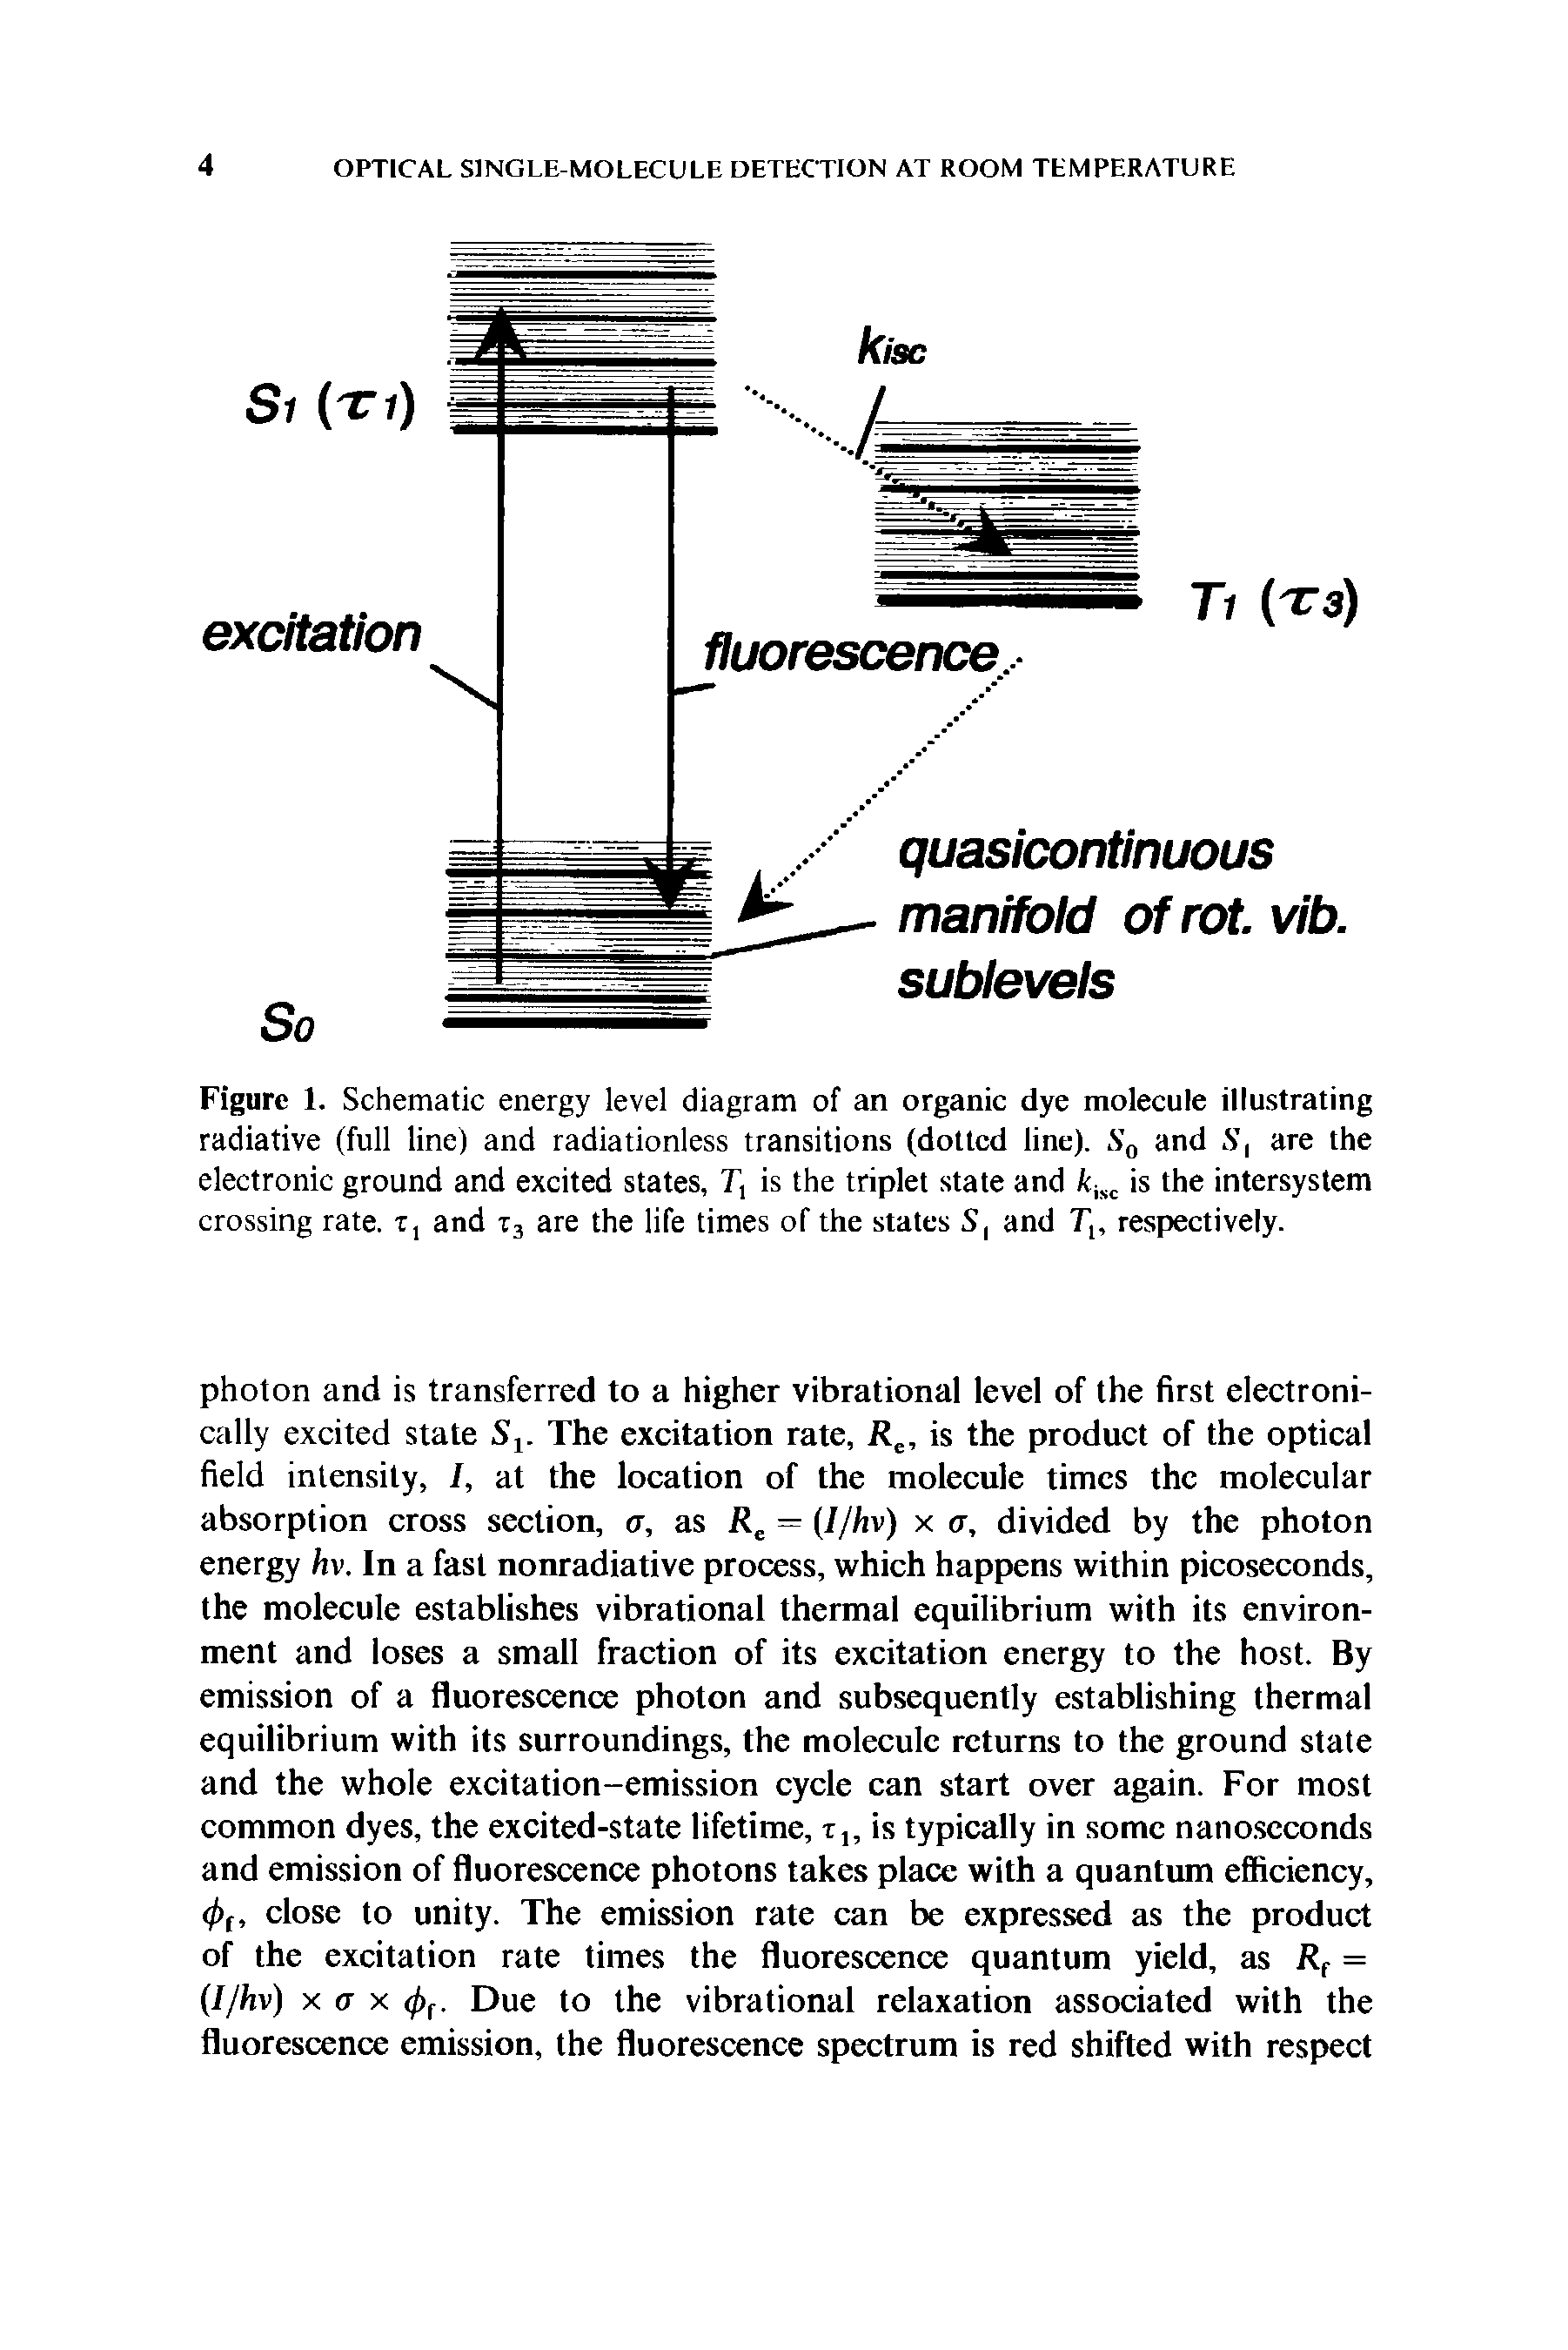 Figure 1. Schematic energy level diagram of an organic dye molecule illustrating radiative (full line) and radiationless transitions (dotted line). S0 and. S, are the electronic ground and excited states, T, is the triplet state and /cjsc is the intersystem crossing rate, t, and t3 are the life times of the states S, and Tj, respectively.